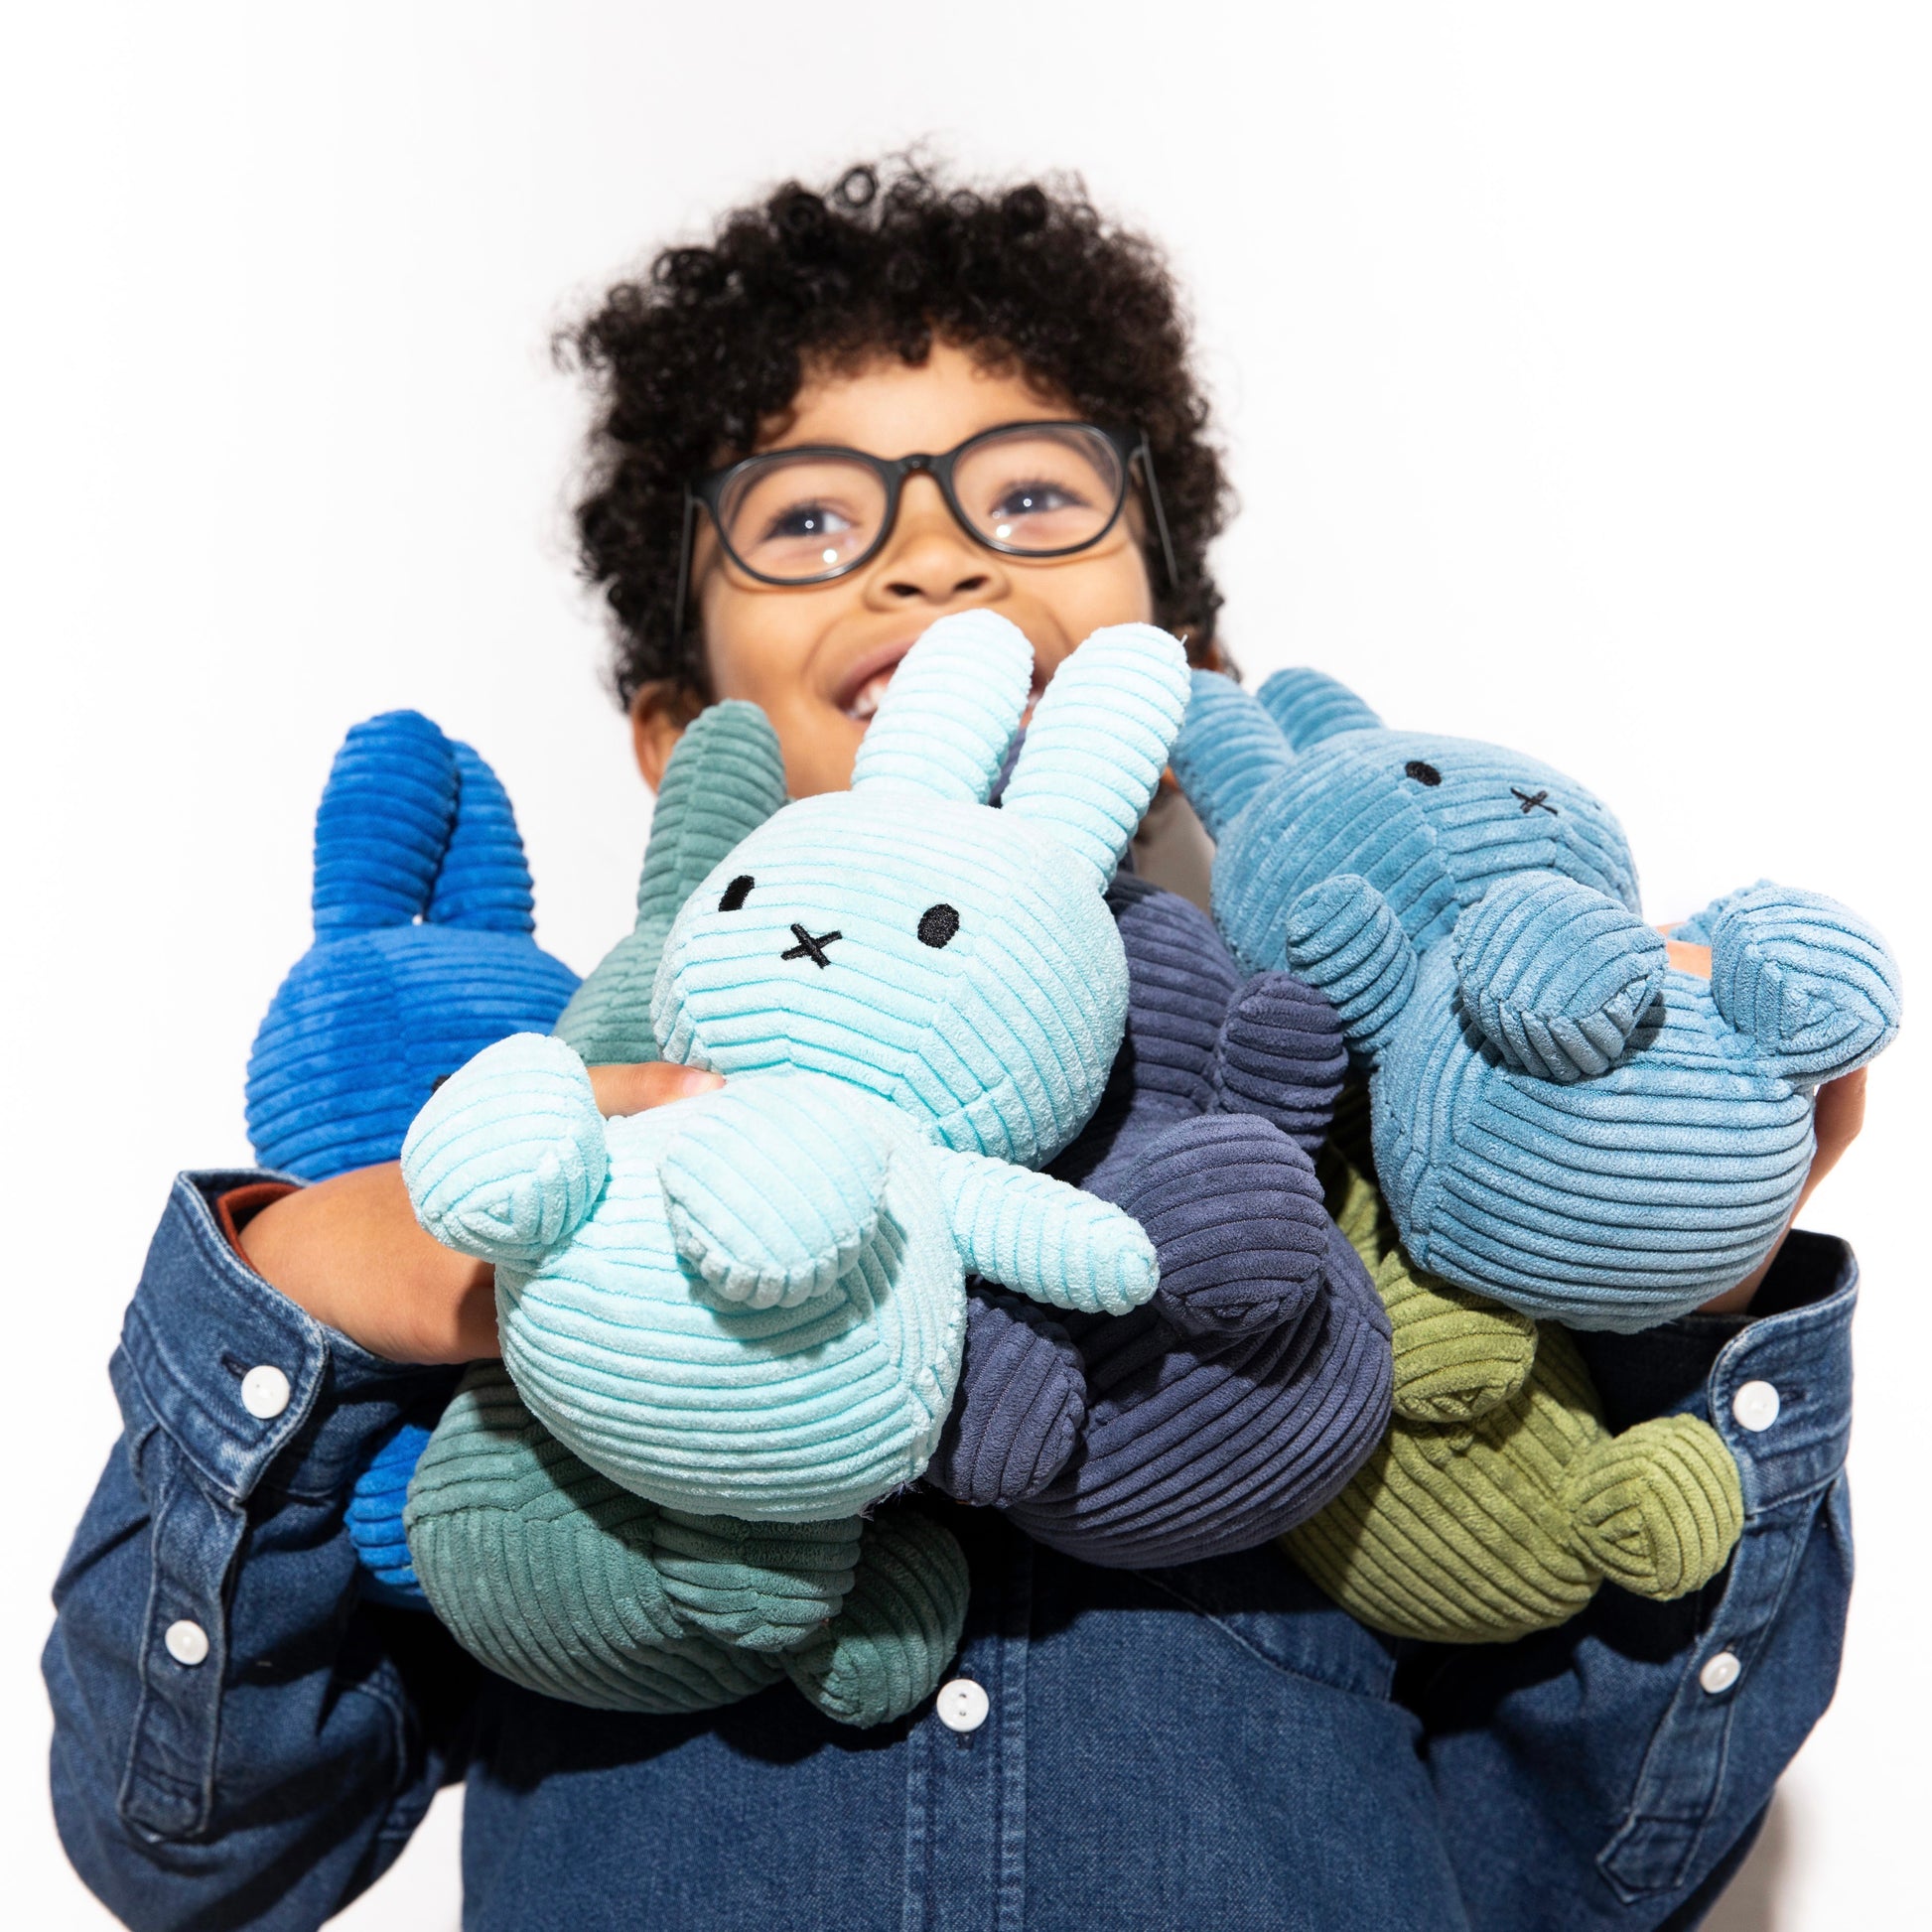 Boy with many miffy in arms